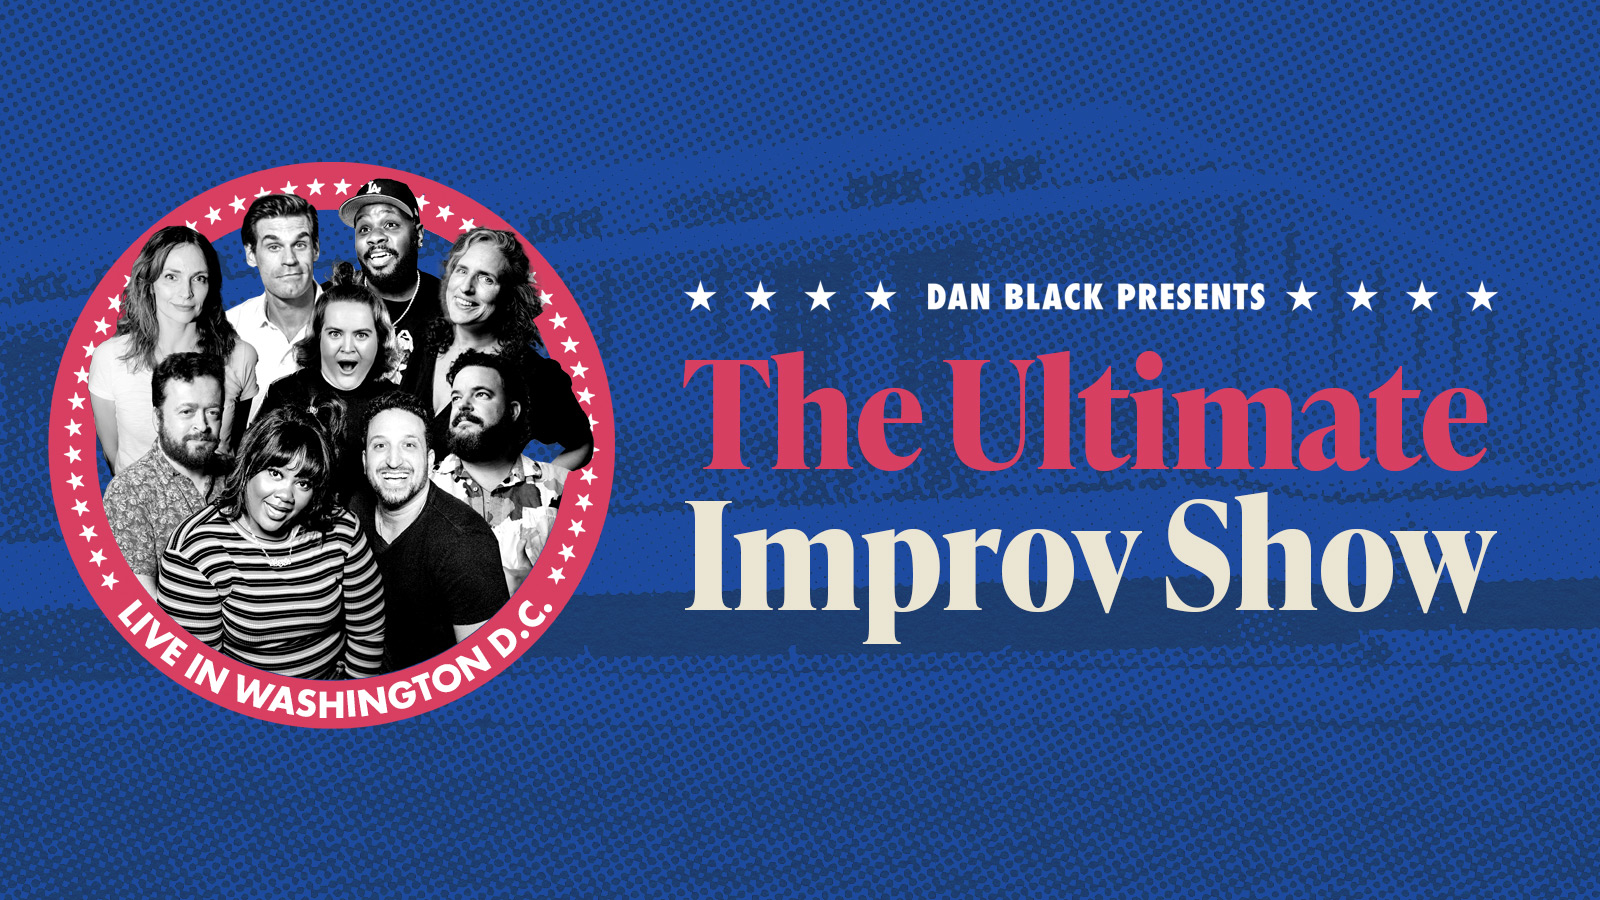 The Ultimate Improv Show